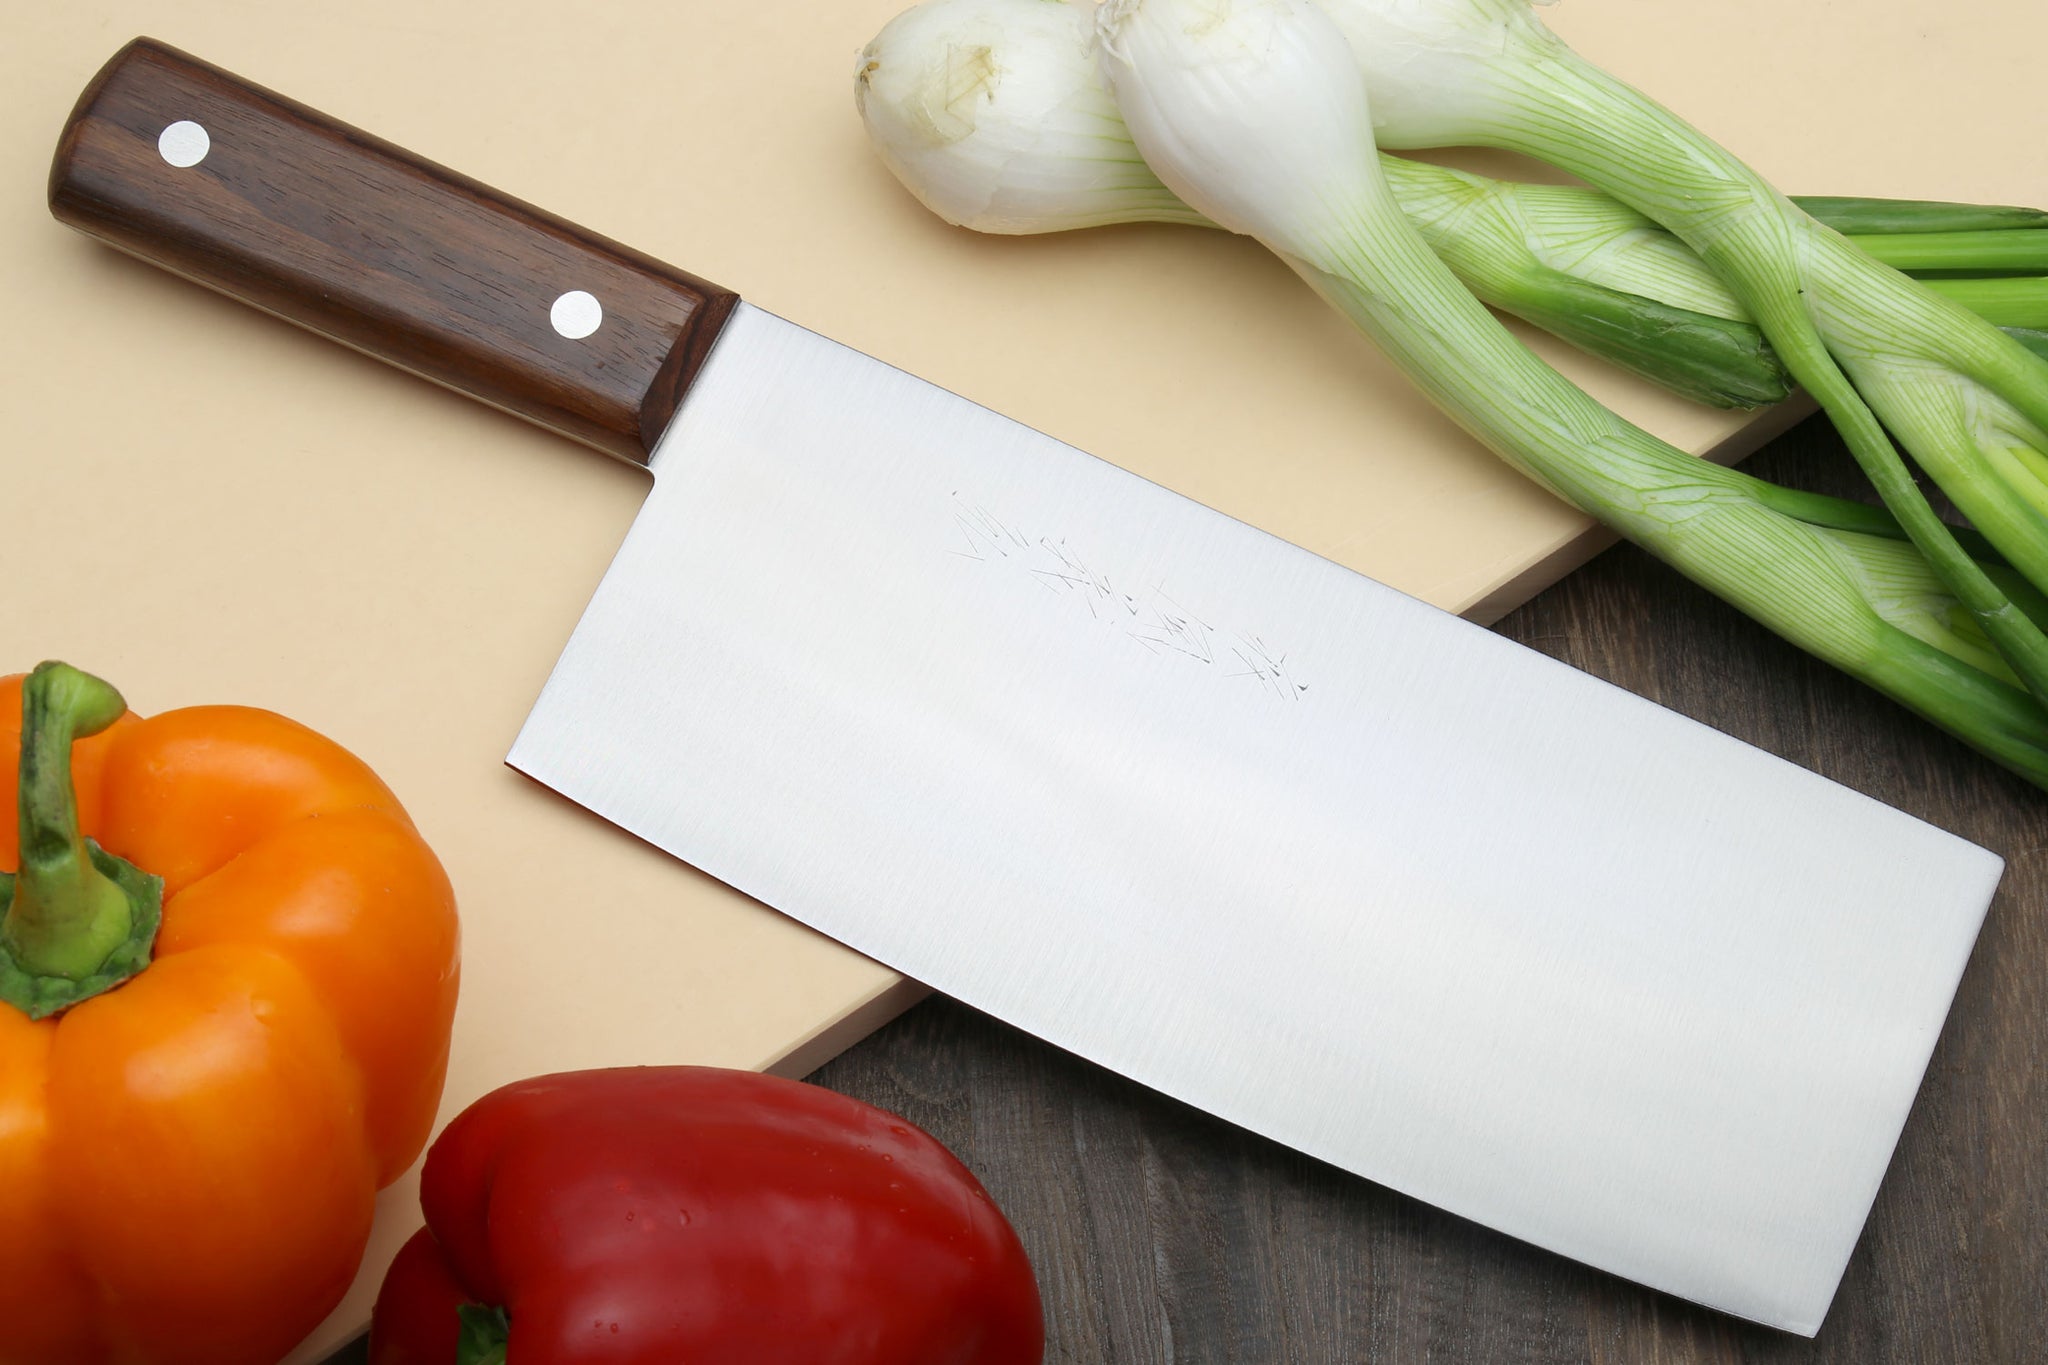 HEZHEN Chinese Chef Knife 6.8 Inch- Meat Cleaver, Chinese Cleaver Knife,Vegta